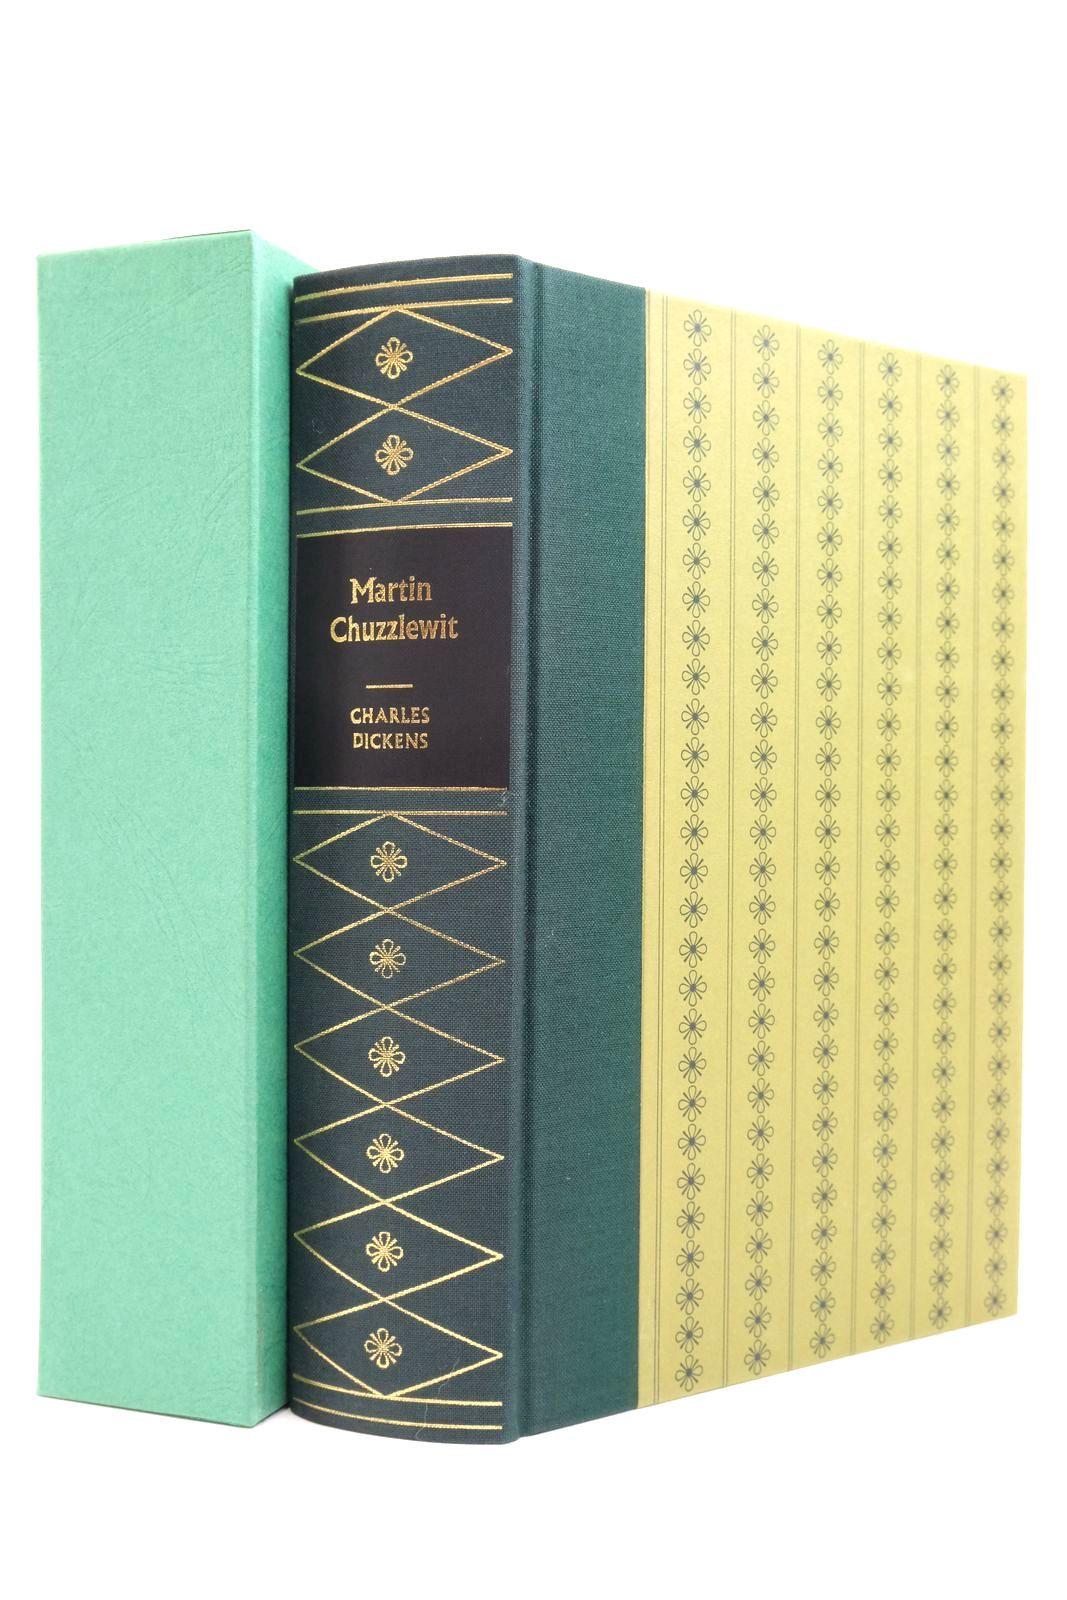 Photo of THE LIFE AND ADVENTURES OF MARTIN CHUZZLEWIT written by Dickens, Charles Hibbert, Christopher illustrated by Keeping, Charles published by Folio Society (STOCK CODE: 2138513)  for sale by Stella & Rose's Books